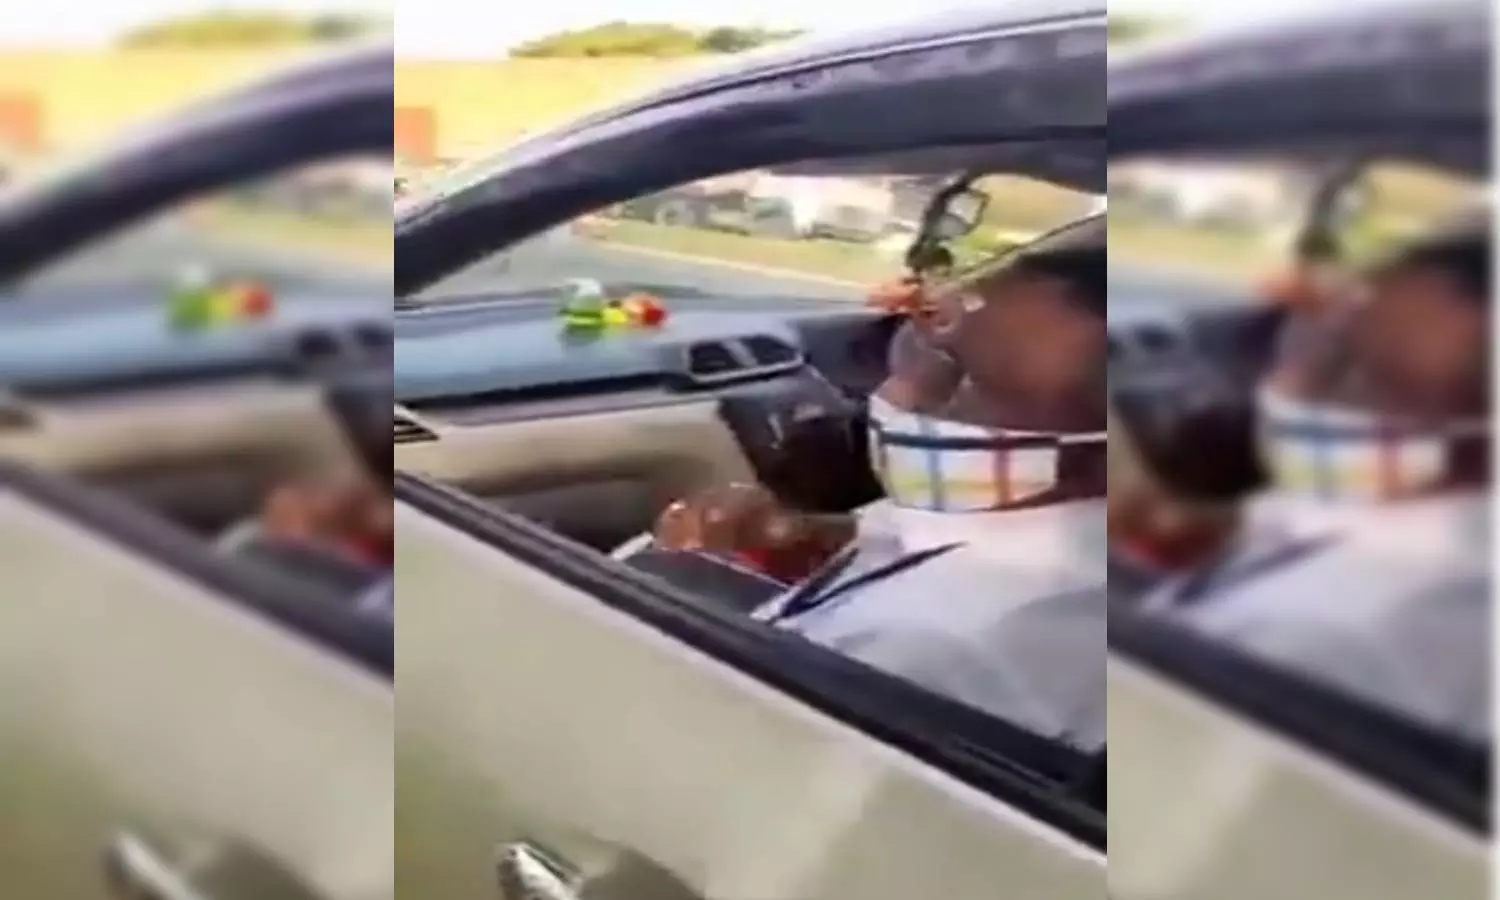 Video: Andhras MV Inspector caught collecting bribe on highway, suspended